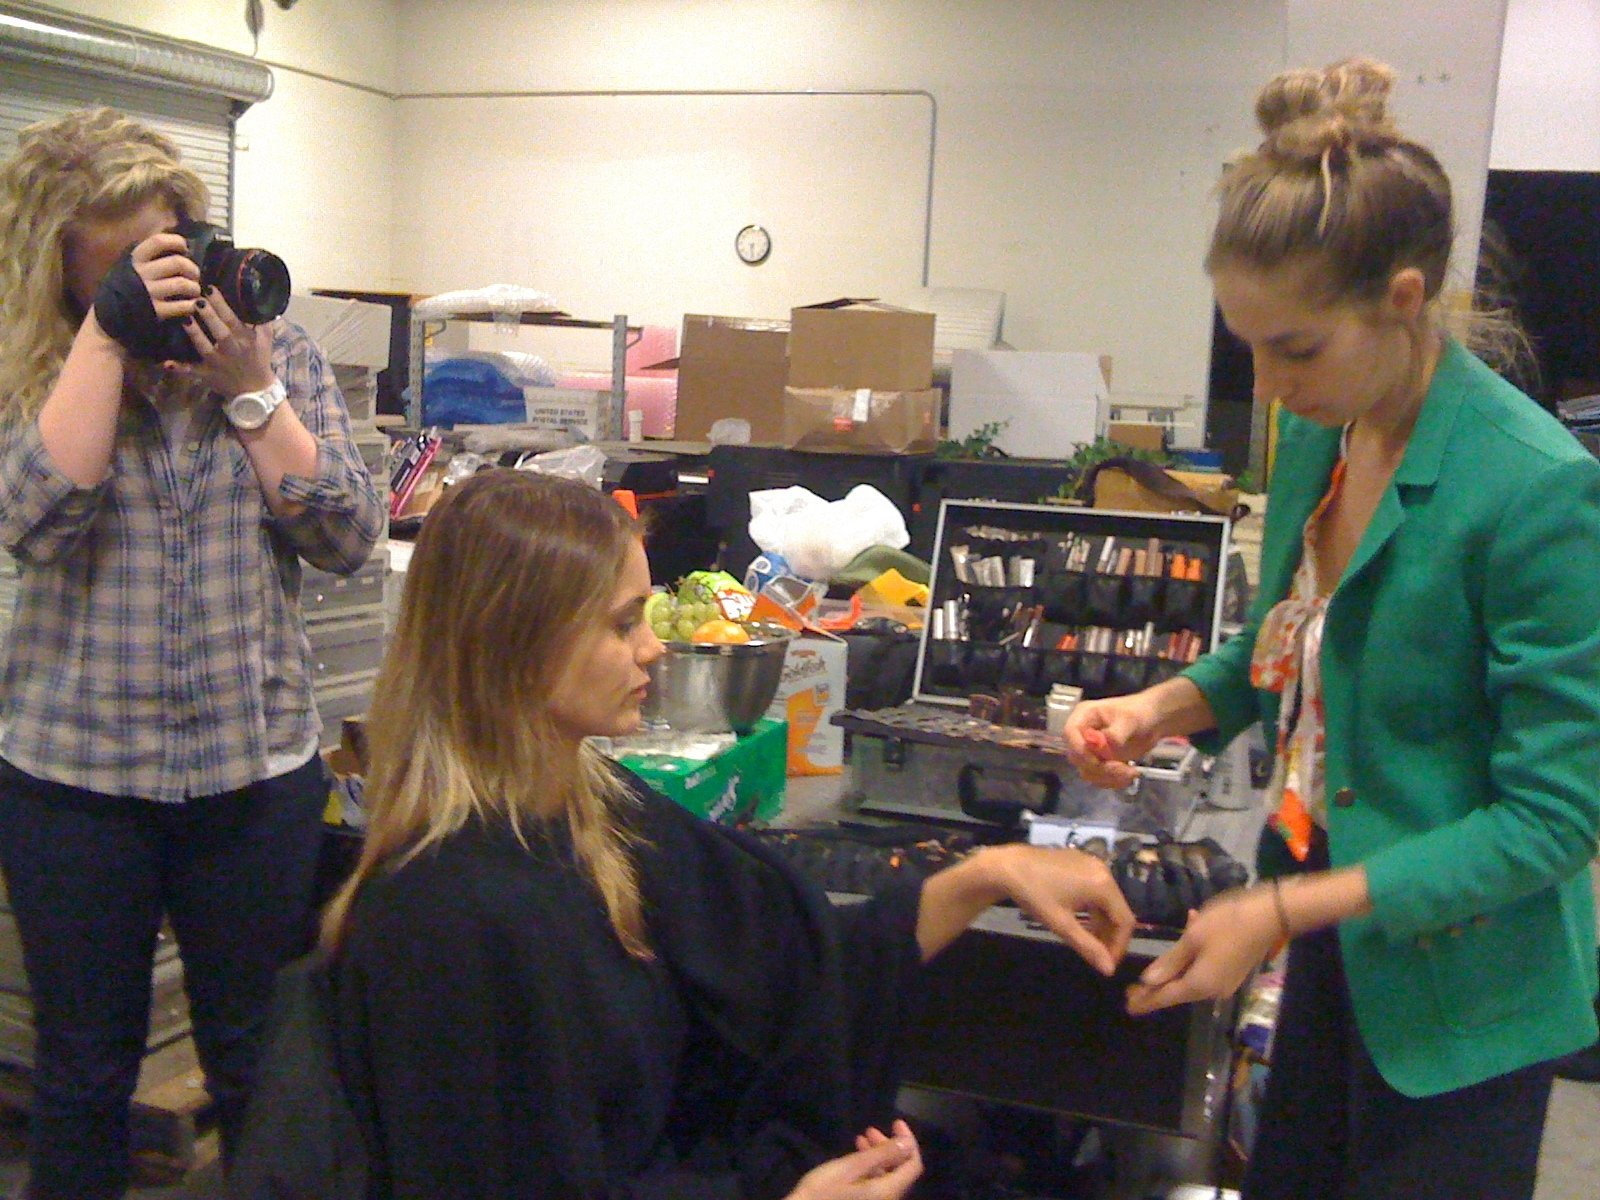 Lucy's on screen Mother Caroline Amiguet getting her hair and make-up done by Brittany Gharring as Alicia Blood from alicia danielle photography shoots some on set photography shots. See them at aliciafoto.com